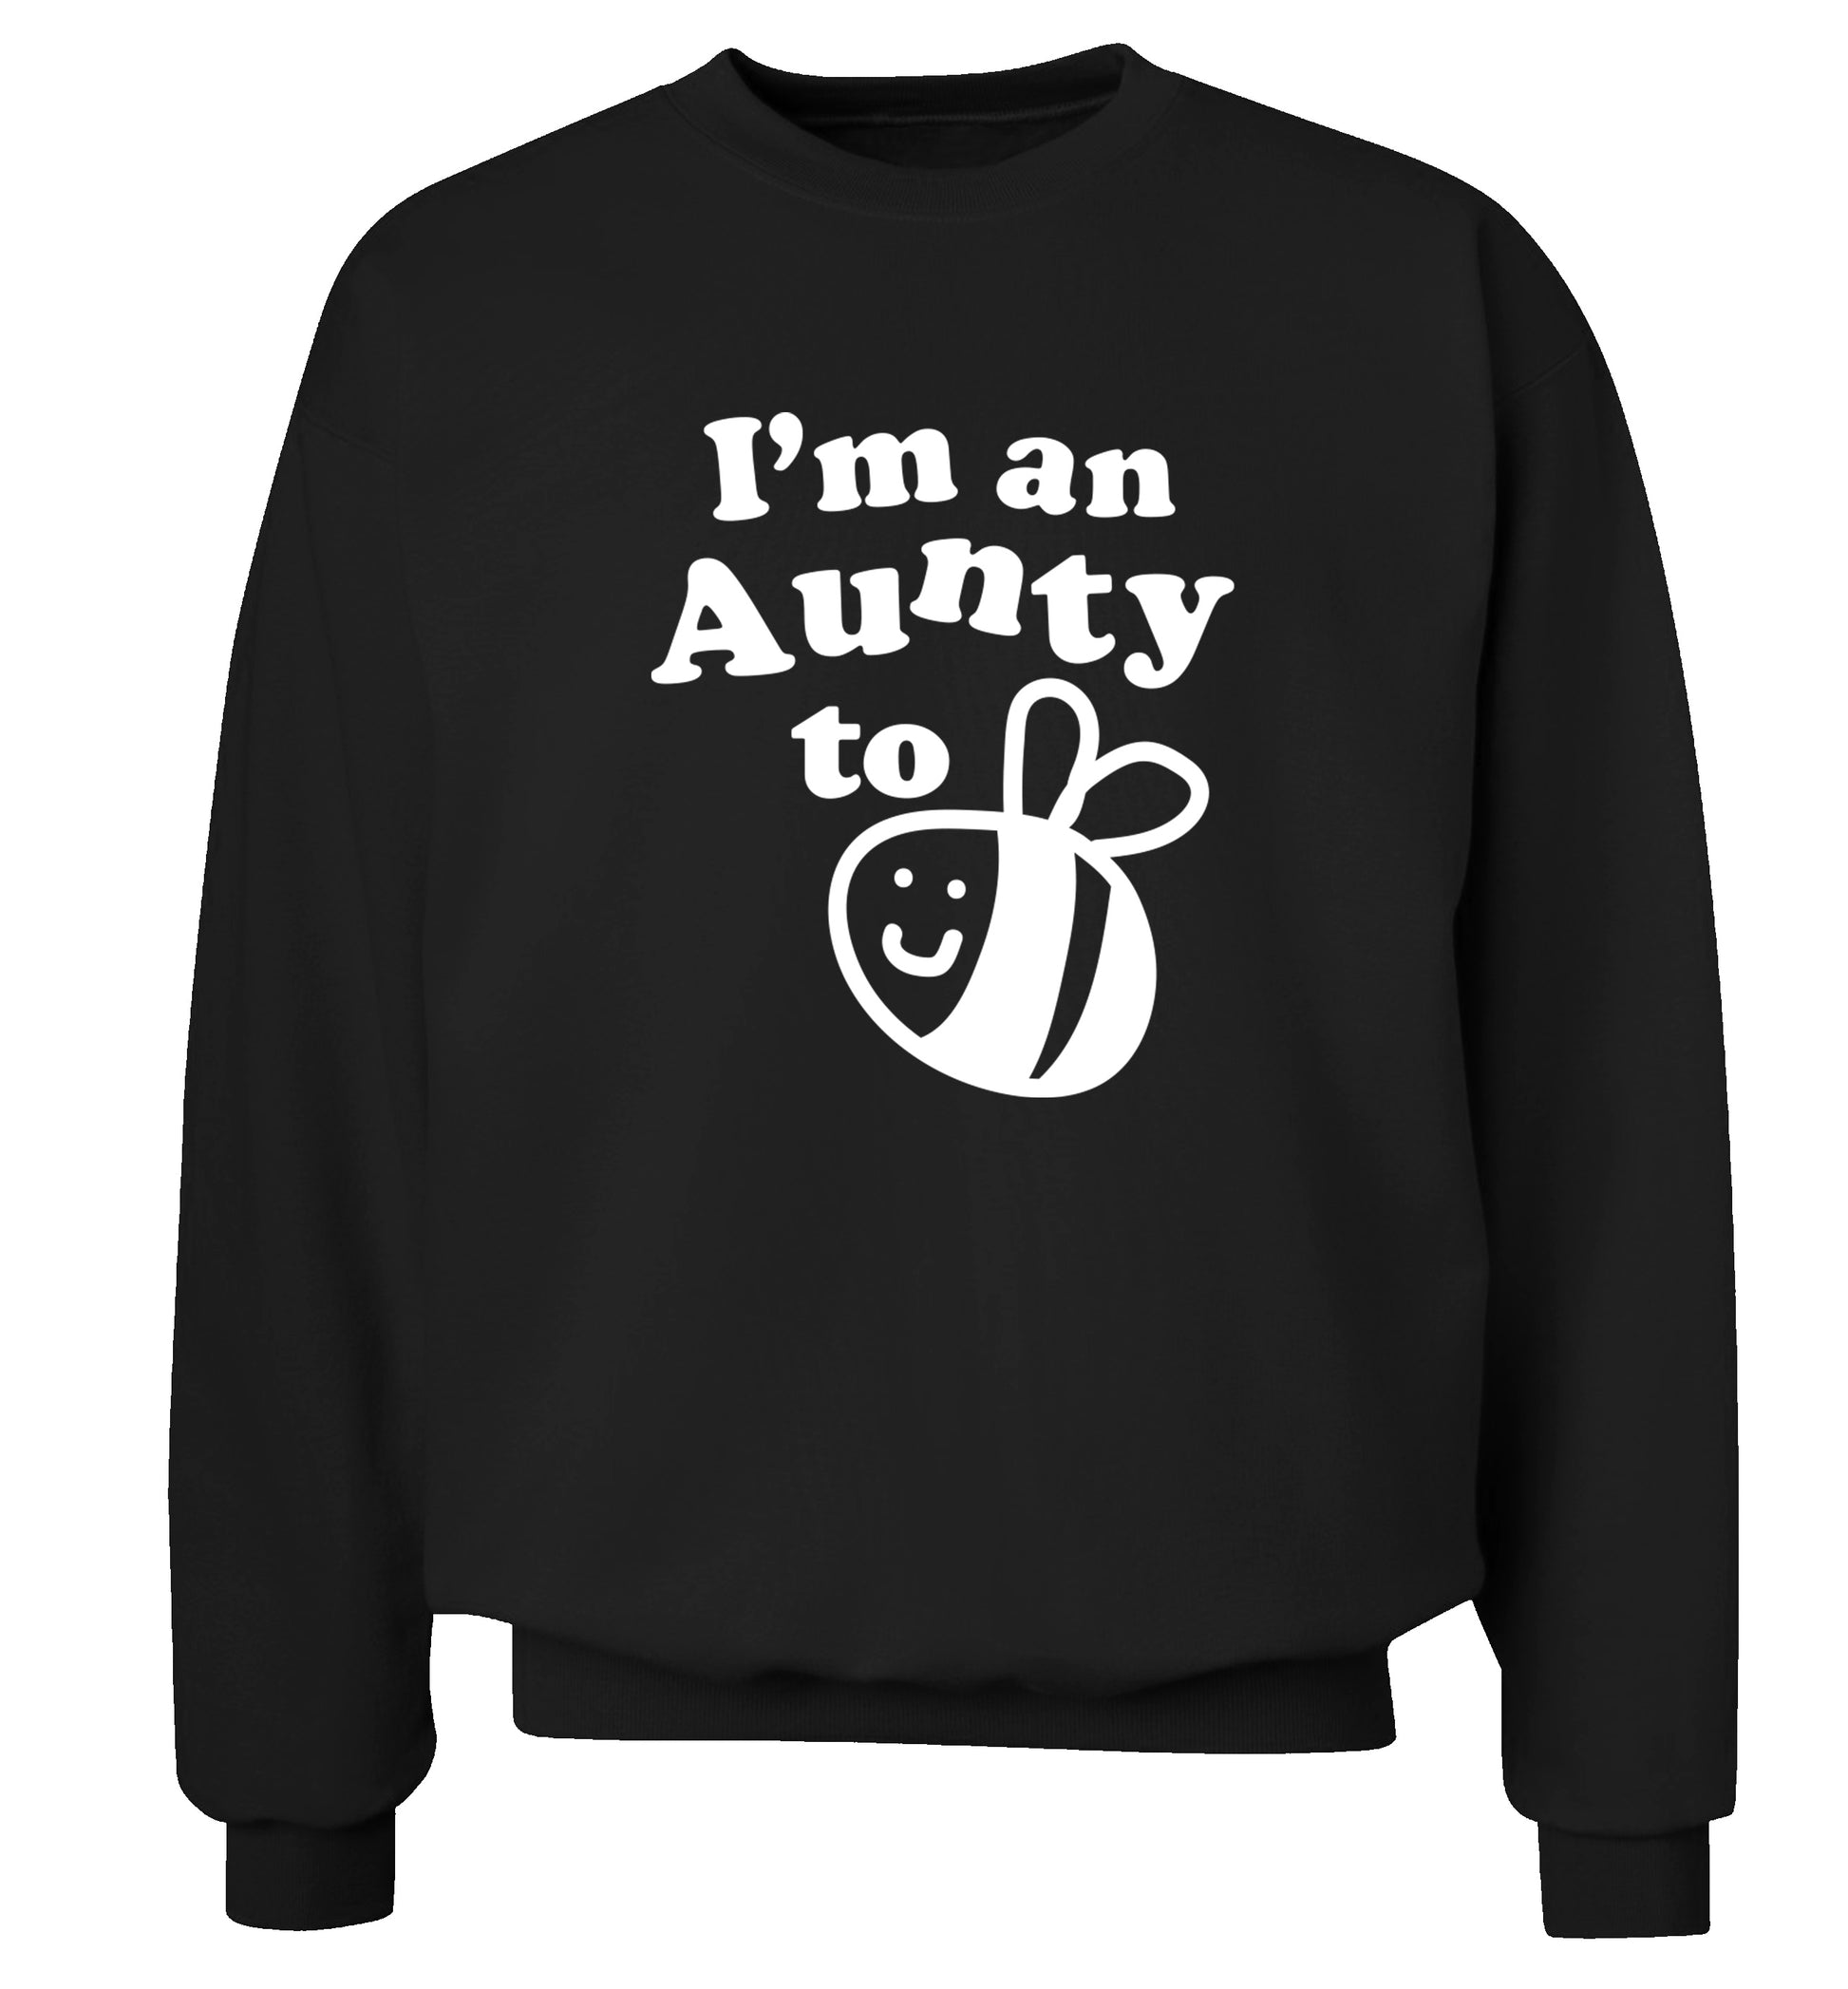 I'm an aunty to be Adult's unisex black Sweater 2XL